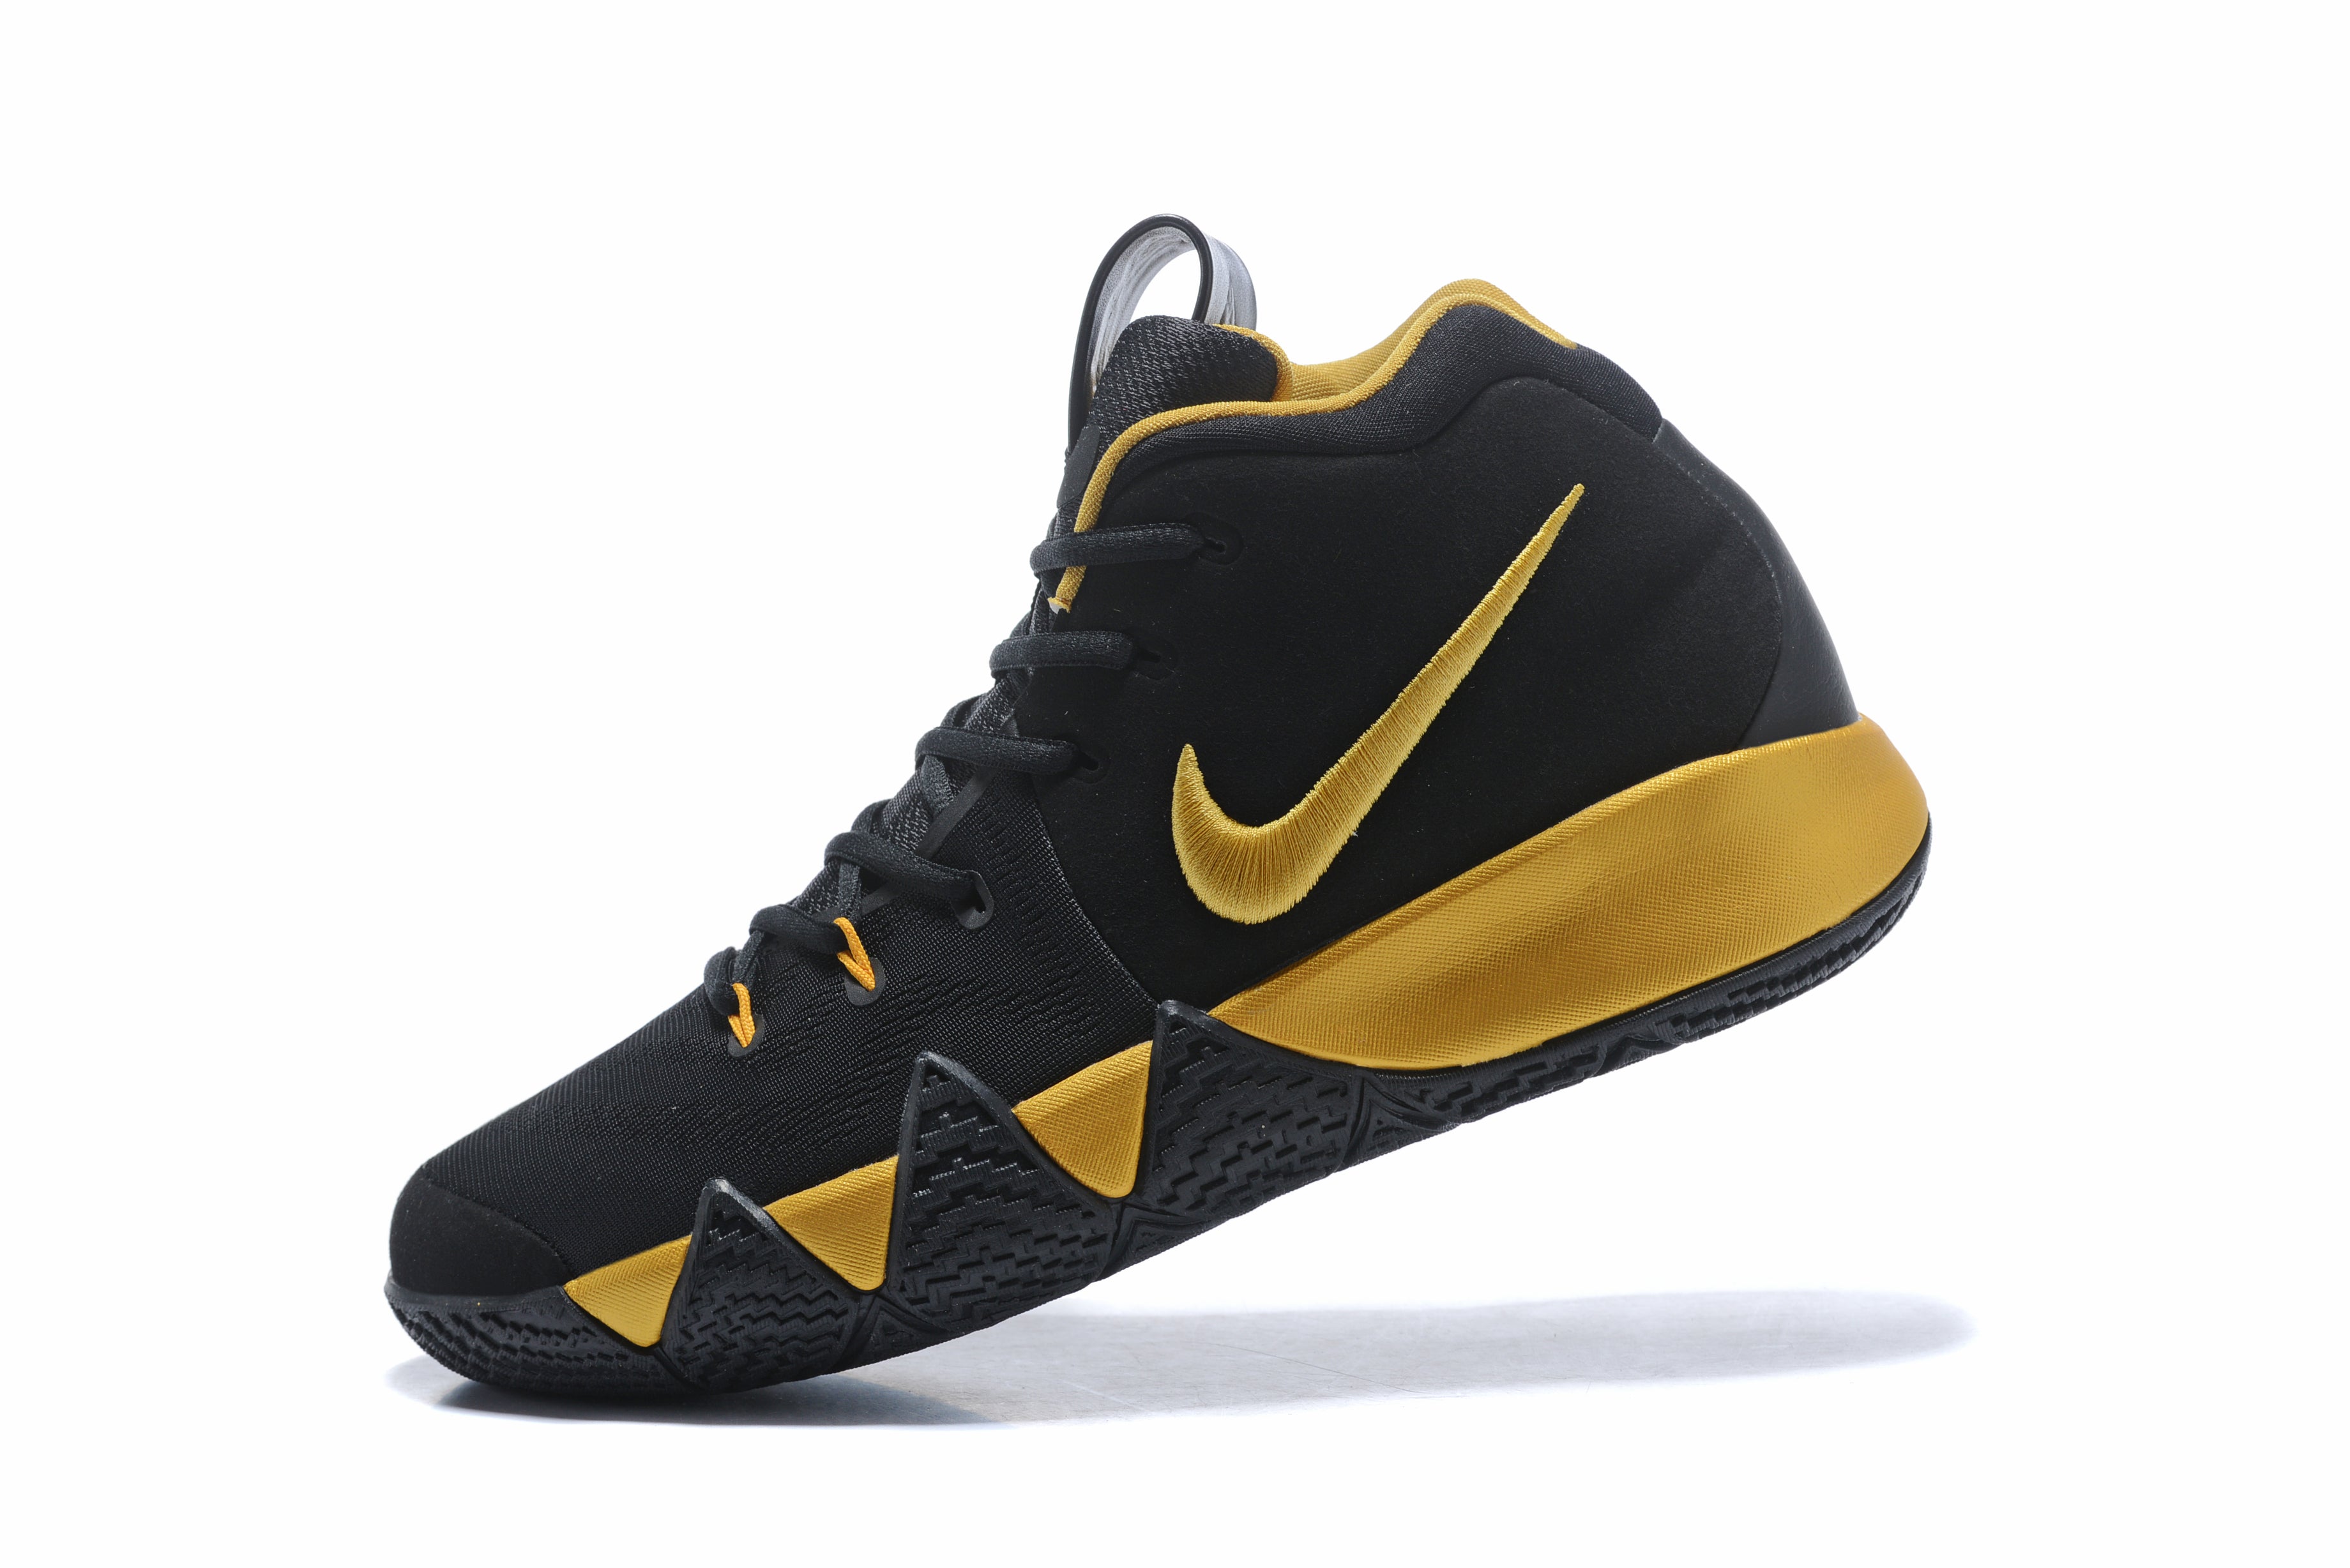 Nike sports shoes Irving 4th generation new black and gold basketball shoes trend all-match non-slip